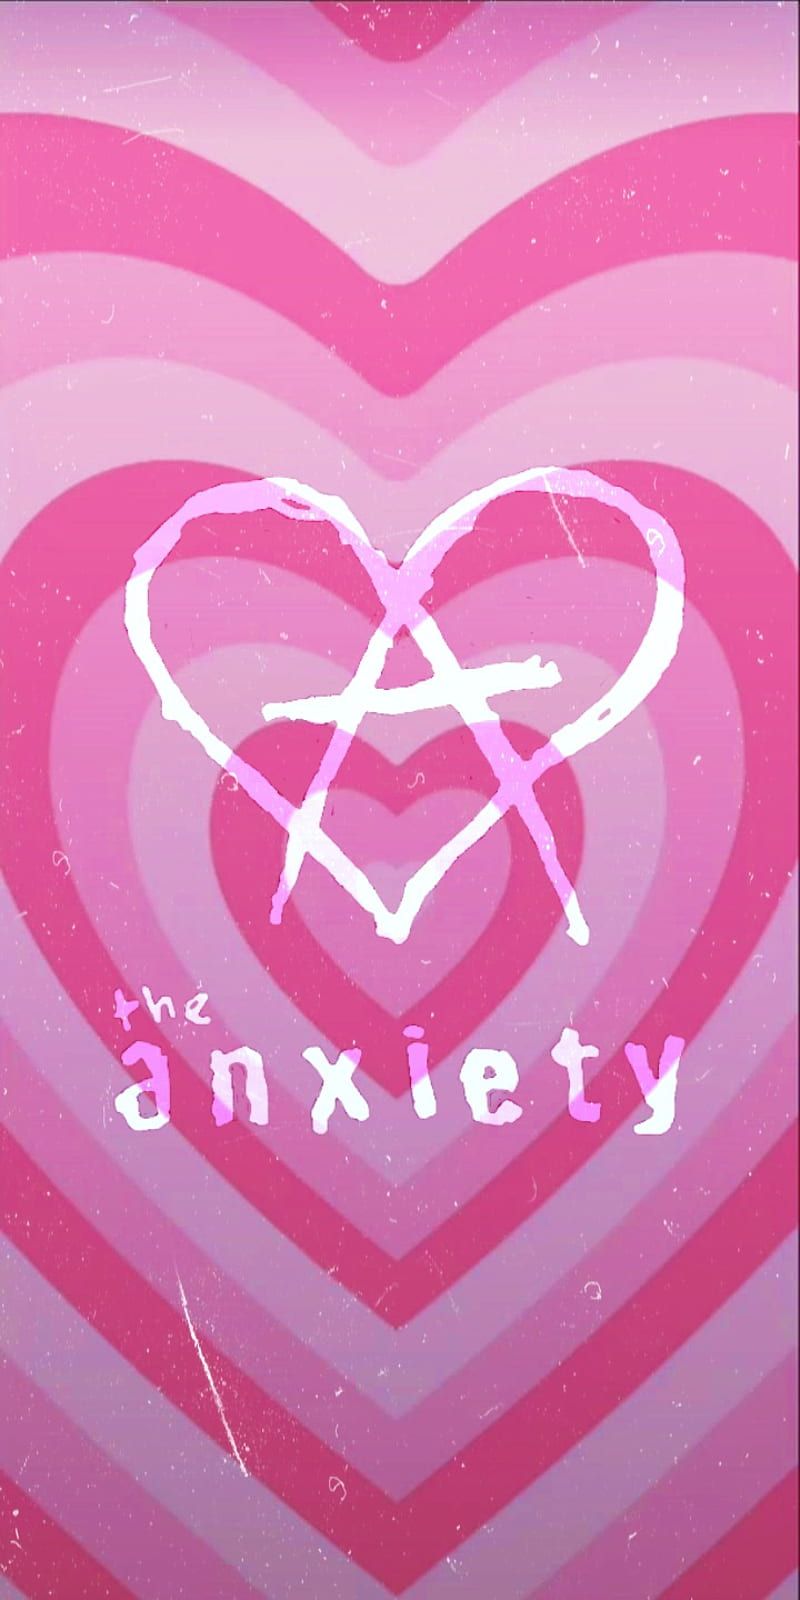 The anxiety poster - Pink heart